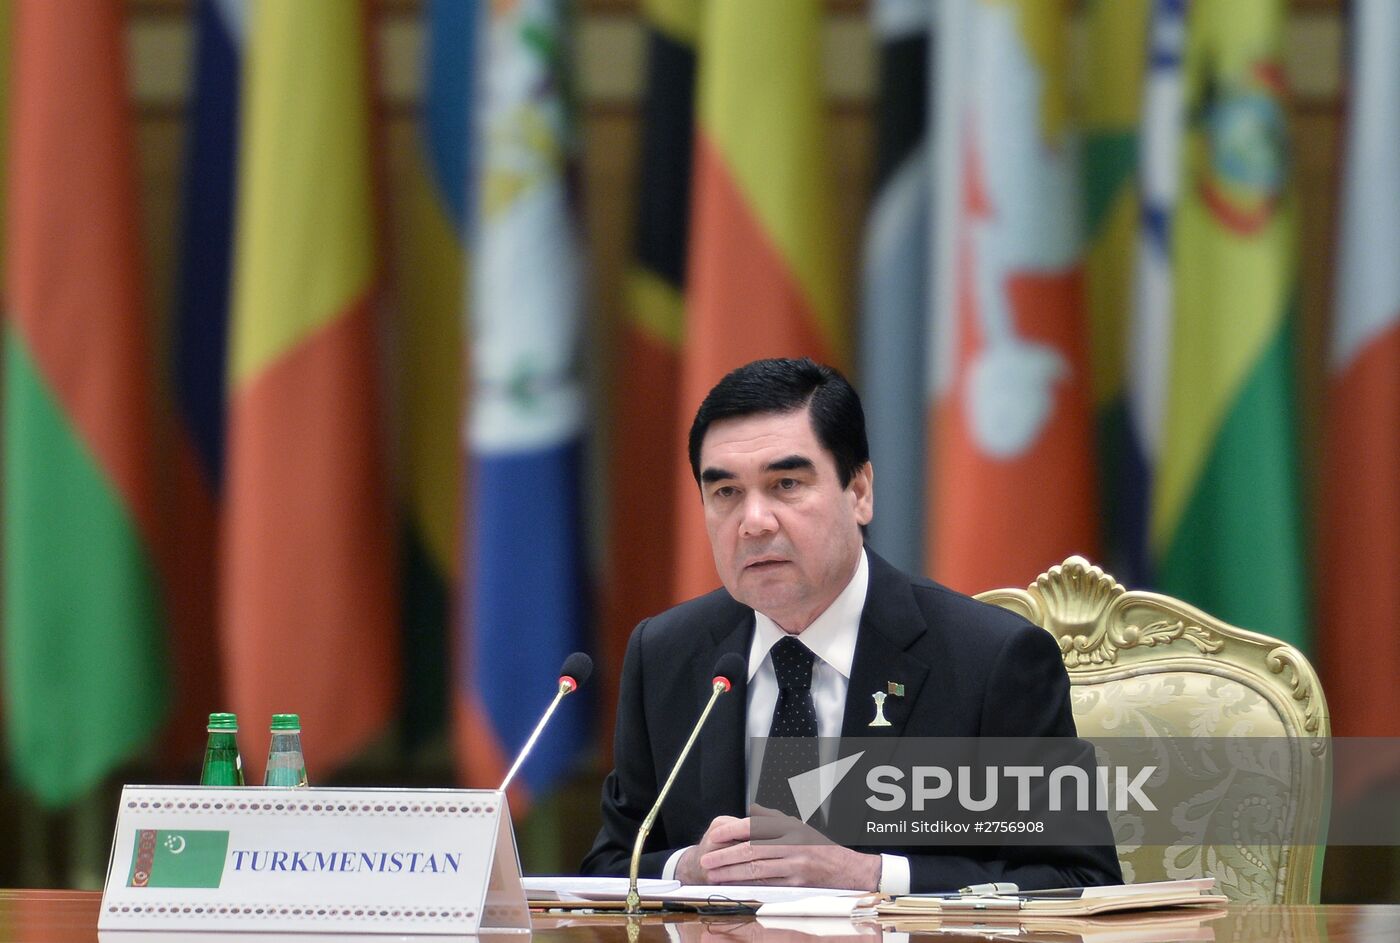 International conference 'The Policy of Neutrality: International Cooperation for Peace, Security and Development' in Ashgabat